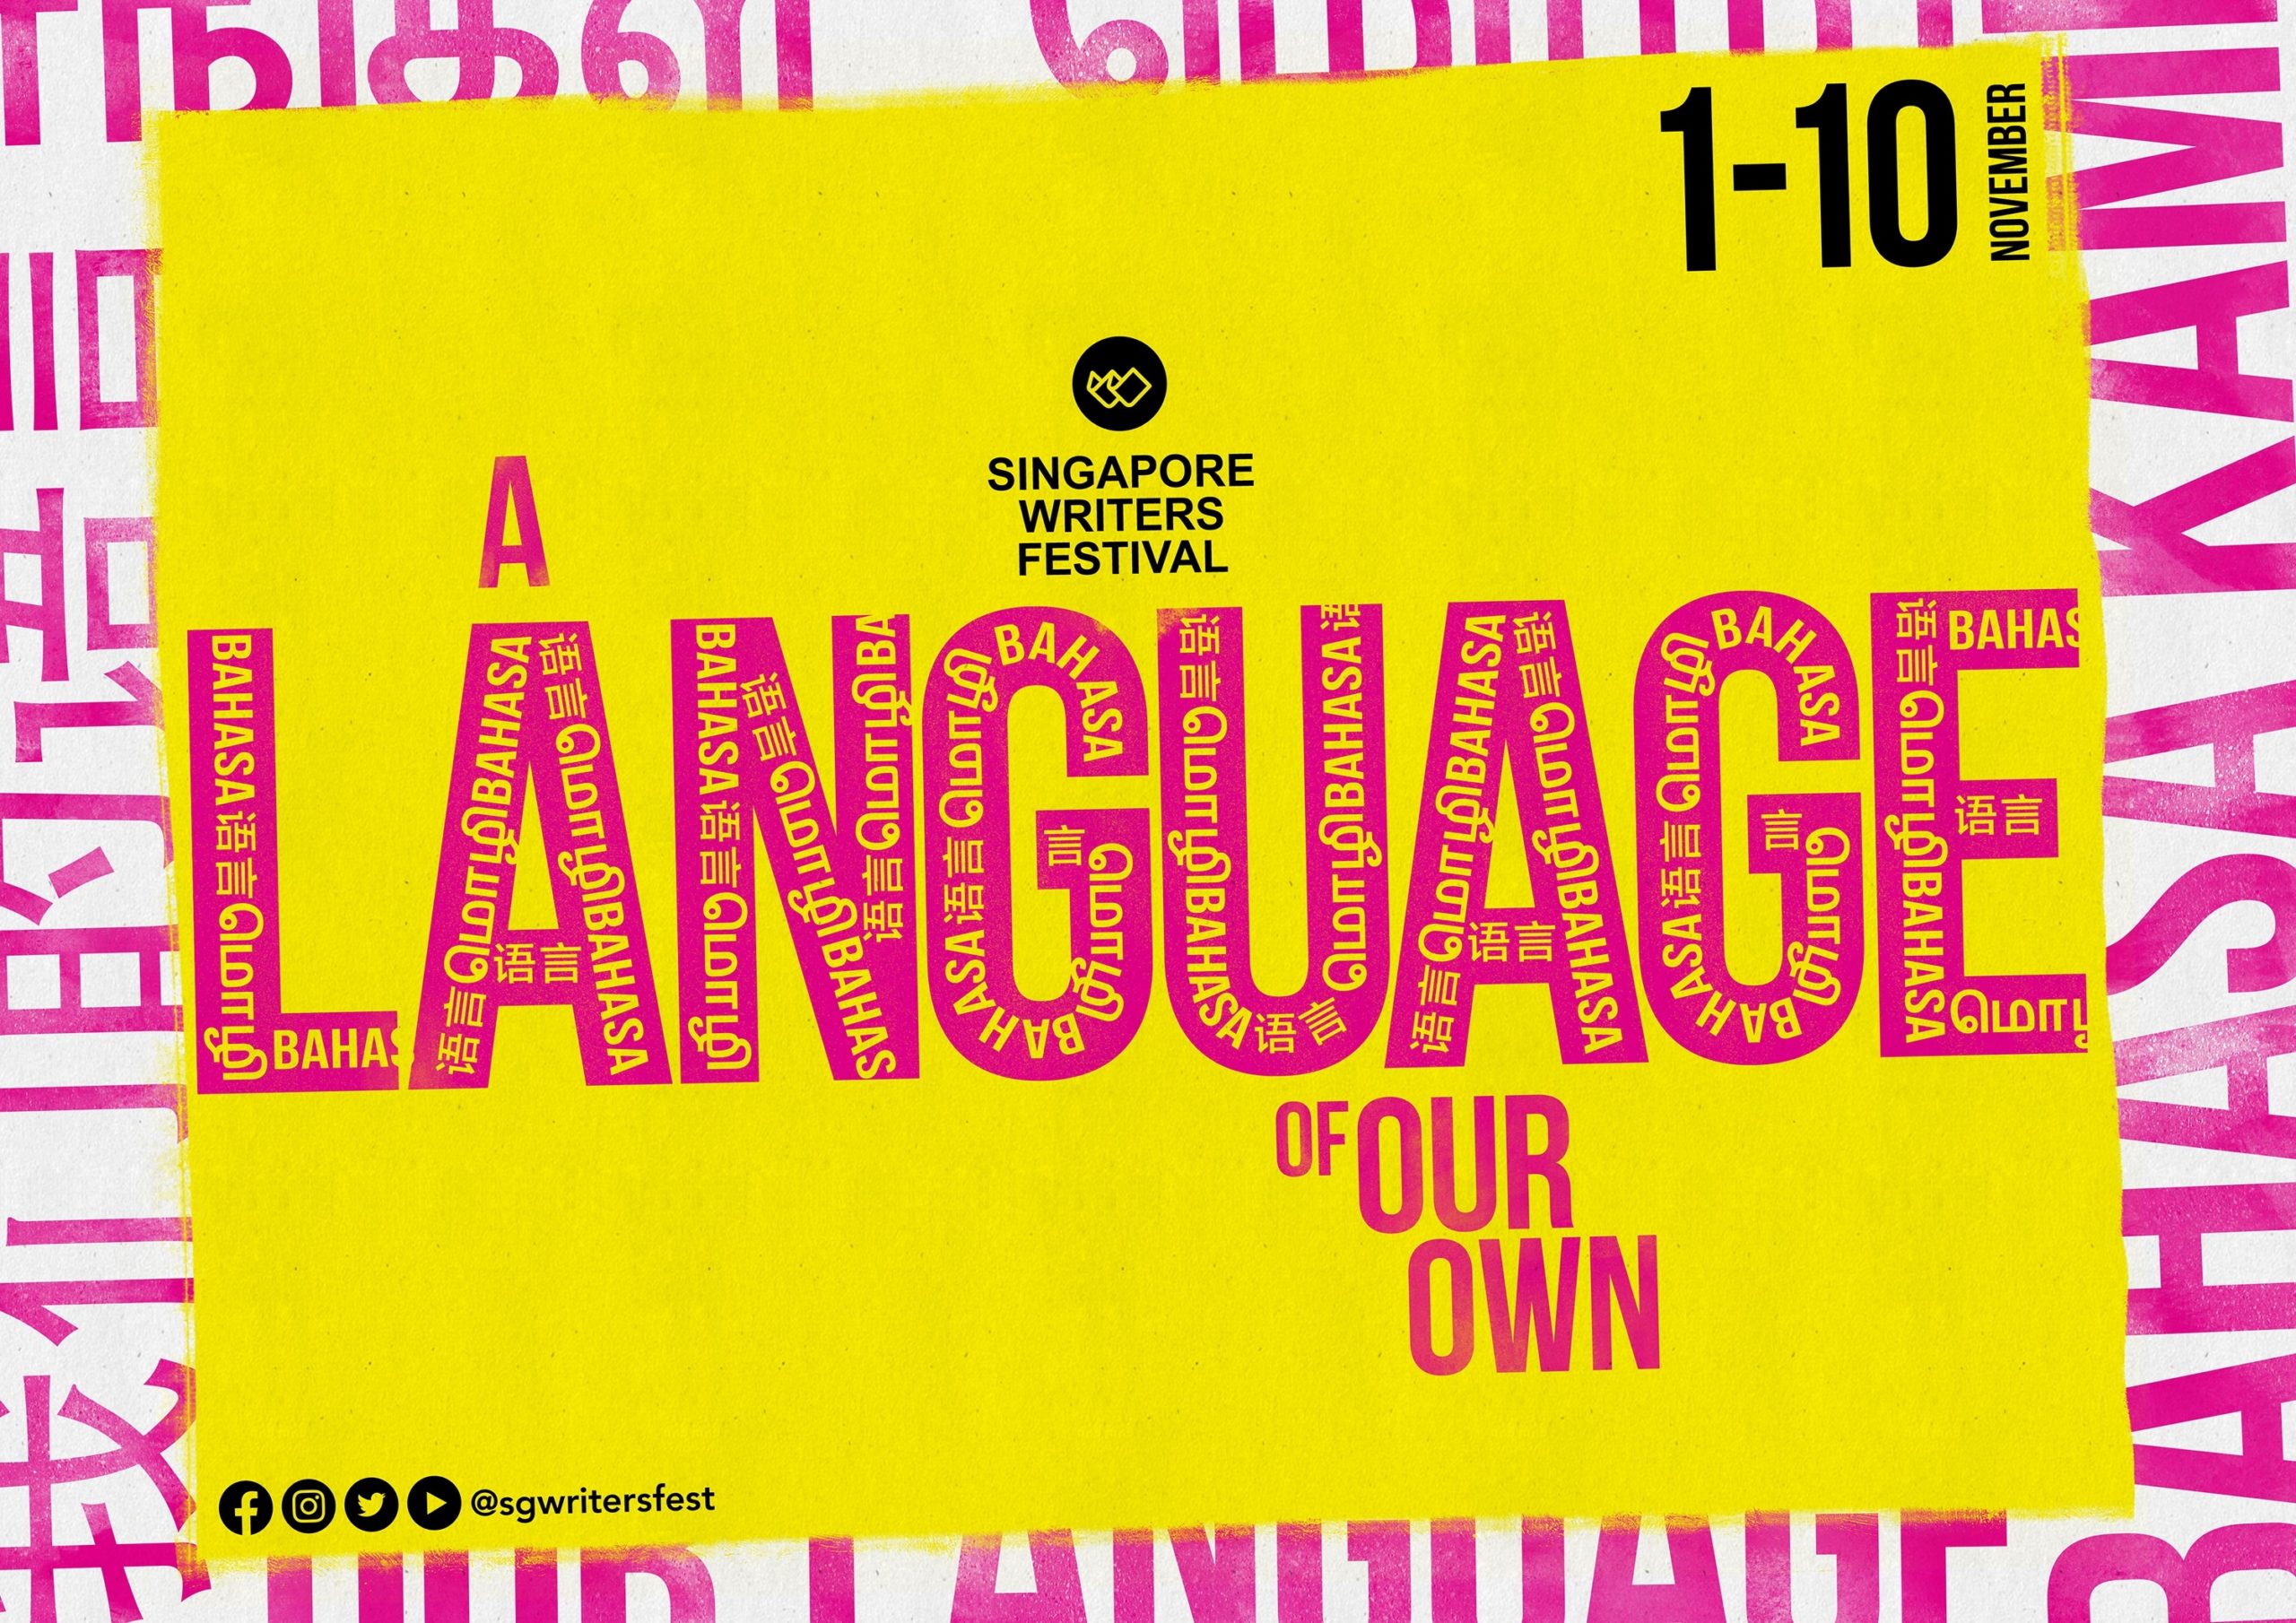  Singapore Writers Festival 2019 To Explore Language In A ‘Fractured’ World